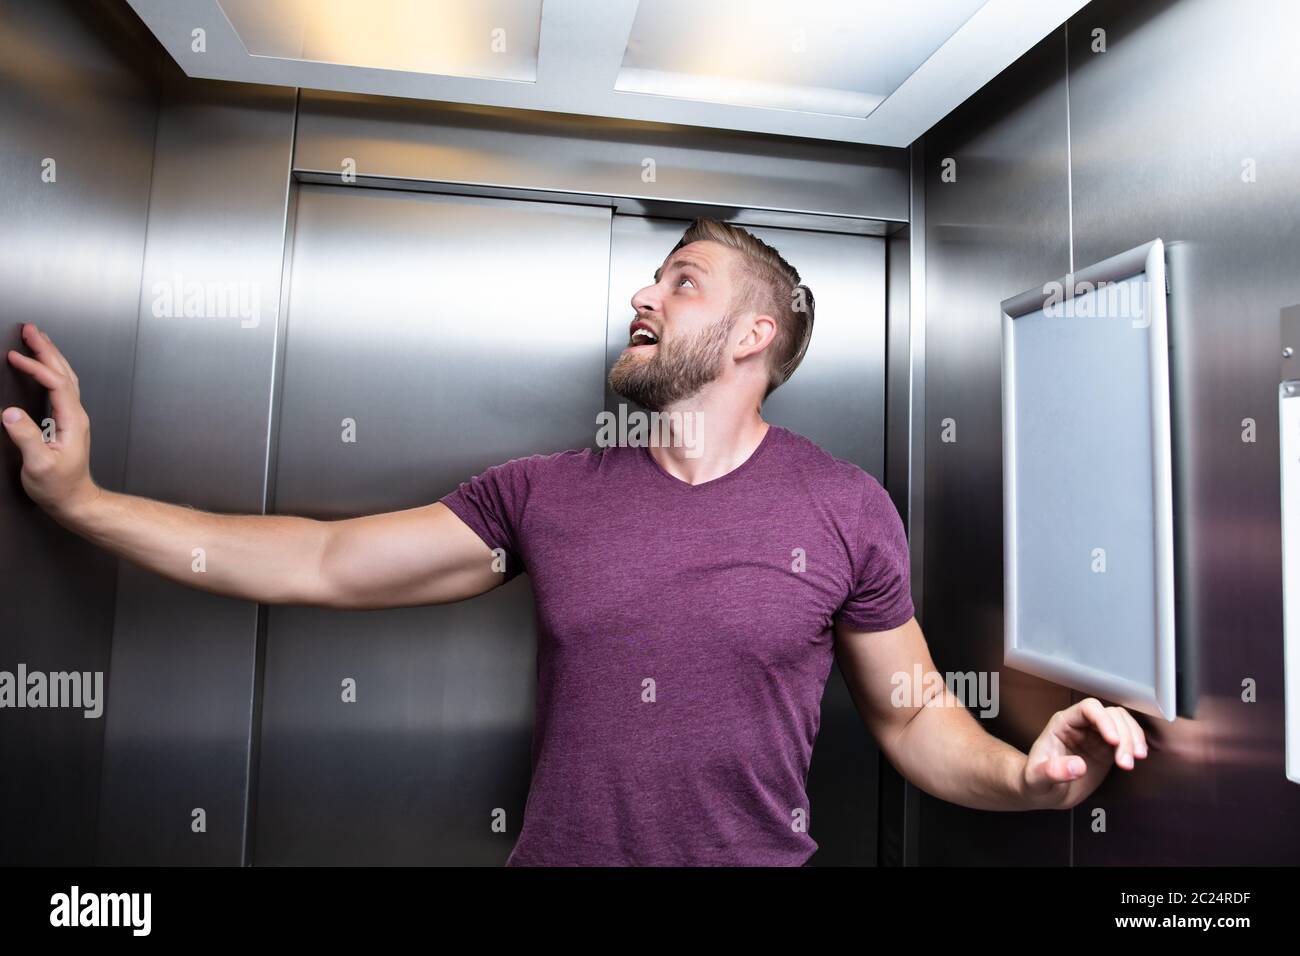 Man Suffering From Claustrophobia Trapped Inside Elevator Screaming Stock Photo